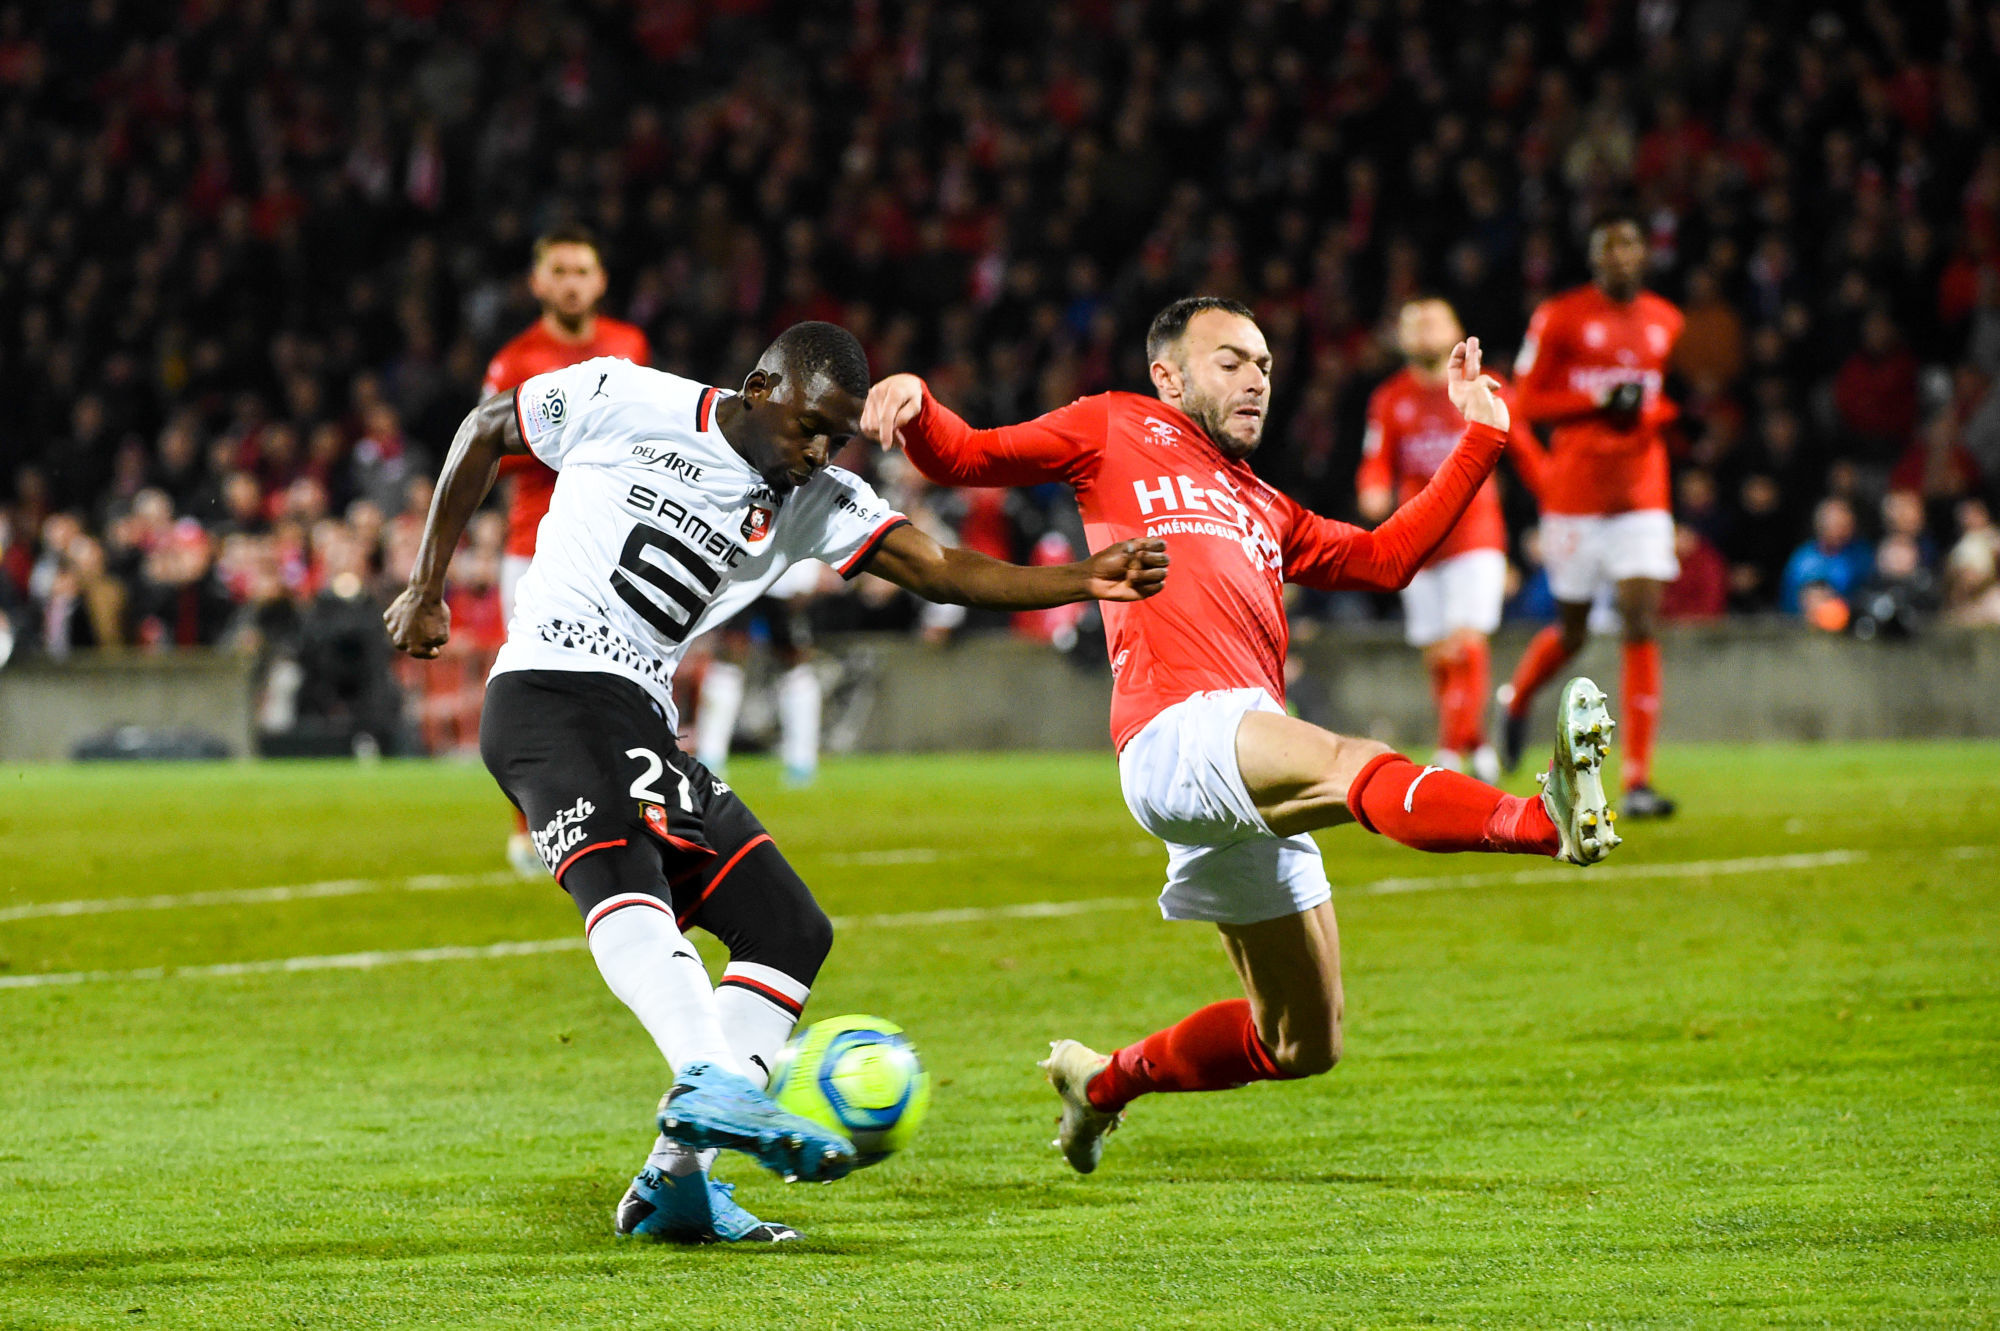 Hamari Traore of Rennes and Romain PHILIPPOTEAUX of Nimes  during the Ligue 1 match between Nimes and Rennes on January 15, 2020 in Nimes, France. (Photo by Alexandre Dimou/Icon Sport) - Romain PHILIPPOTEAUX - Hamari TRAORE - Stade des Costières - Nimes (France)